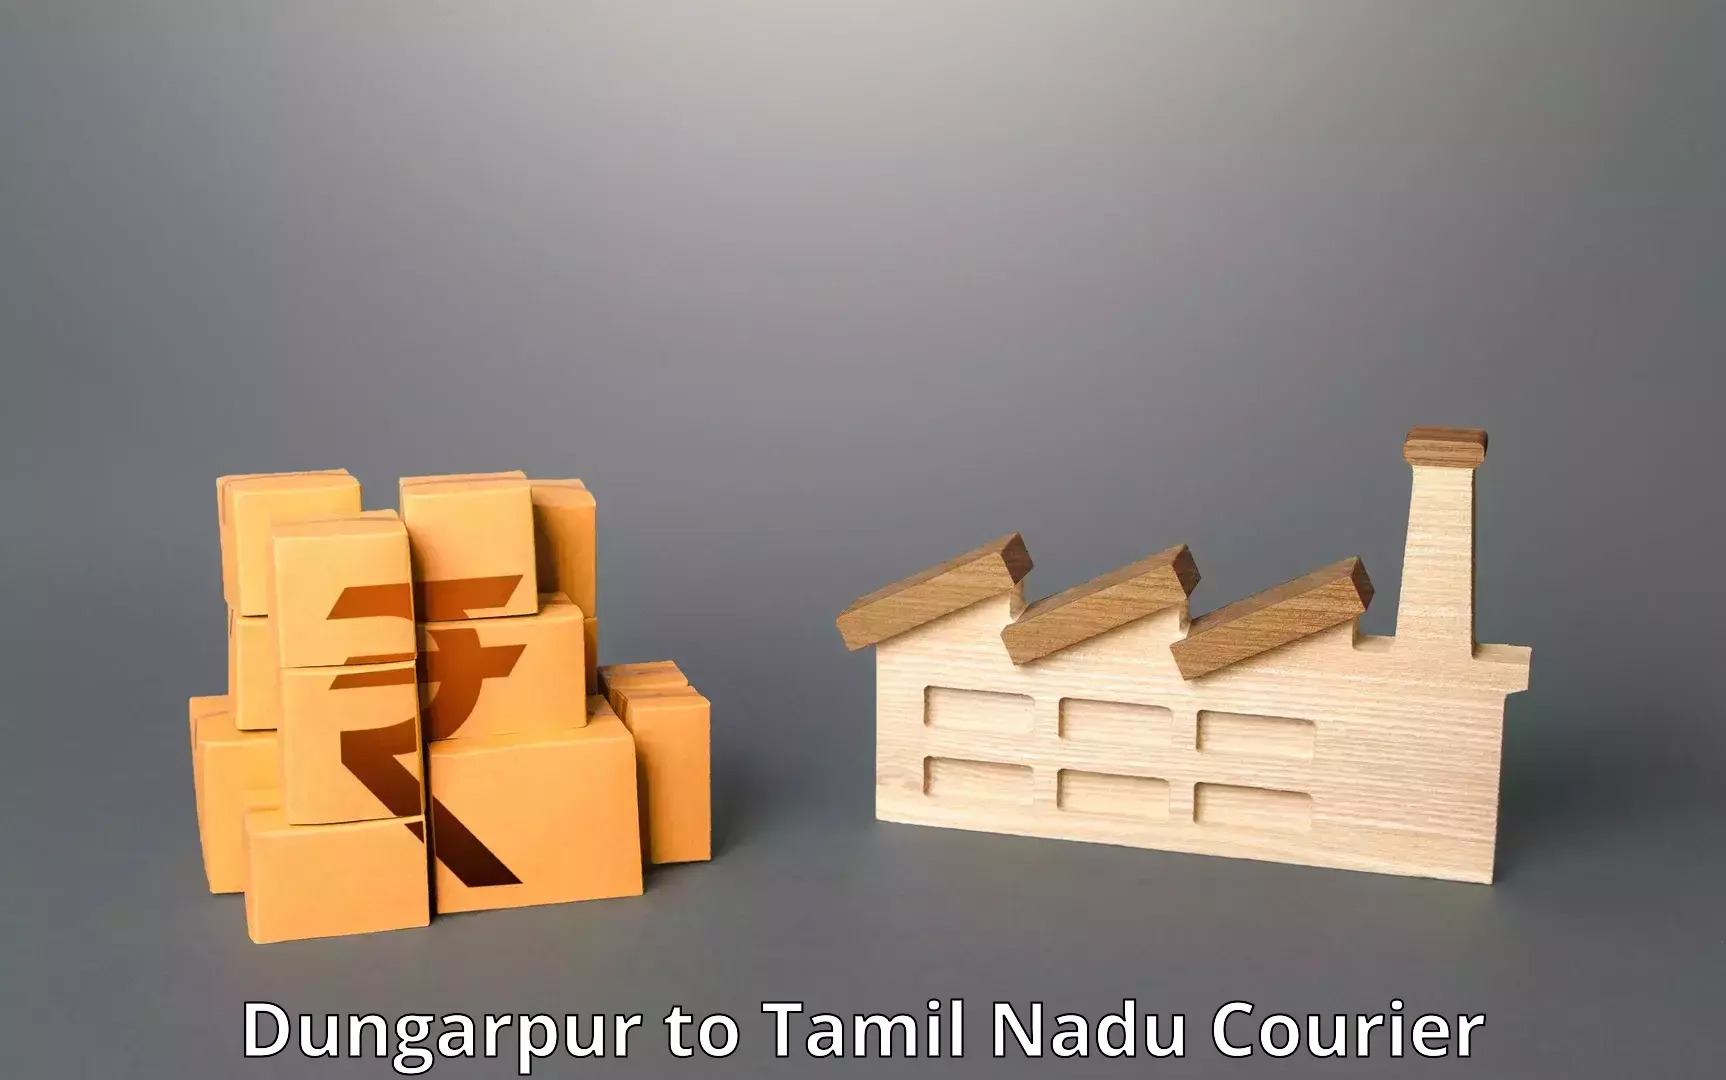 Express mail service in Dungarpur to Tamil Nadu